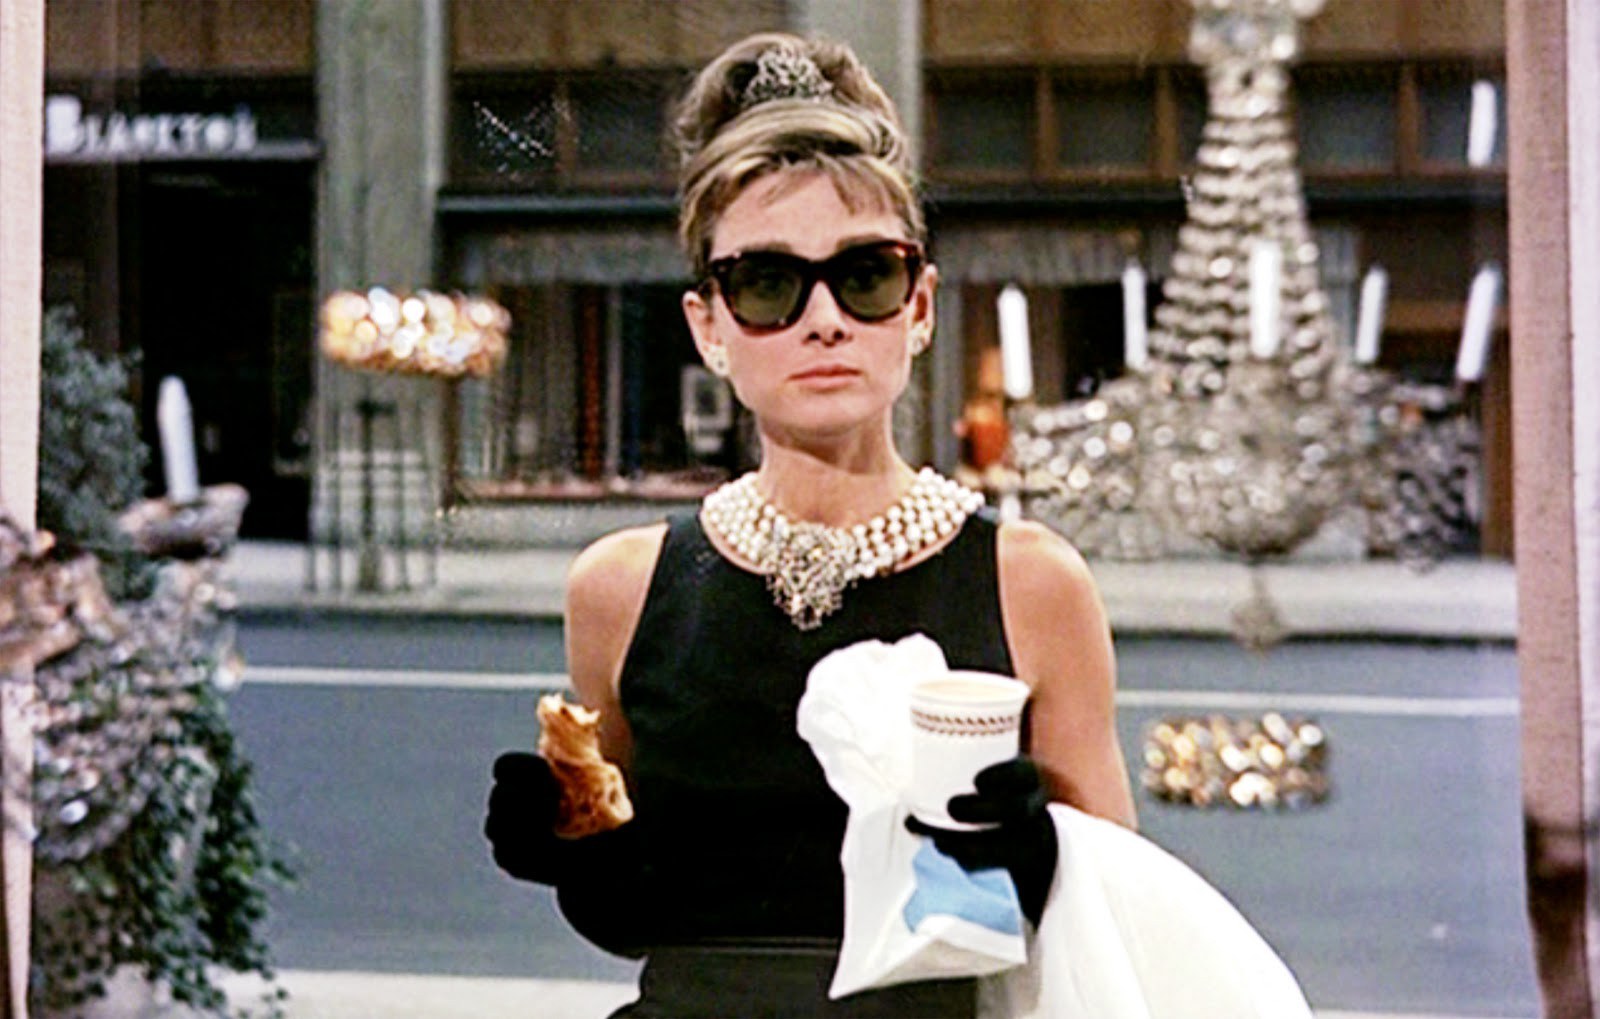 Amazing Breakfast At Tiffany's Pictures & Backgrounds